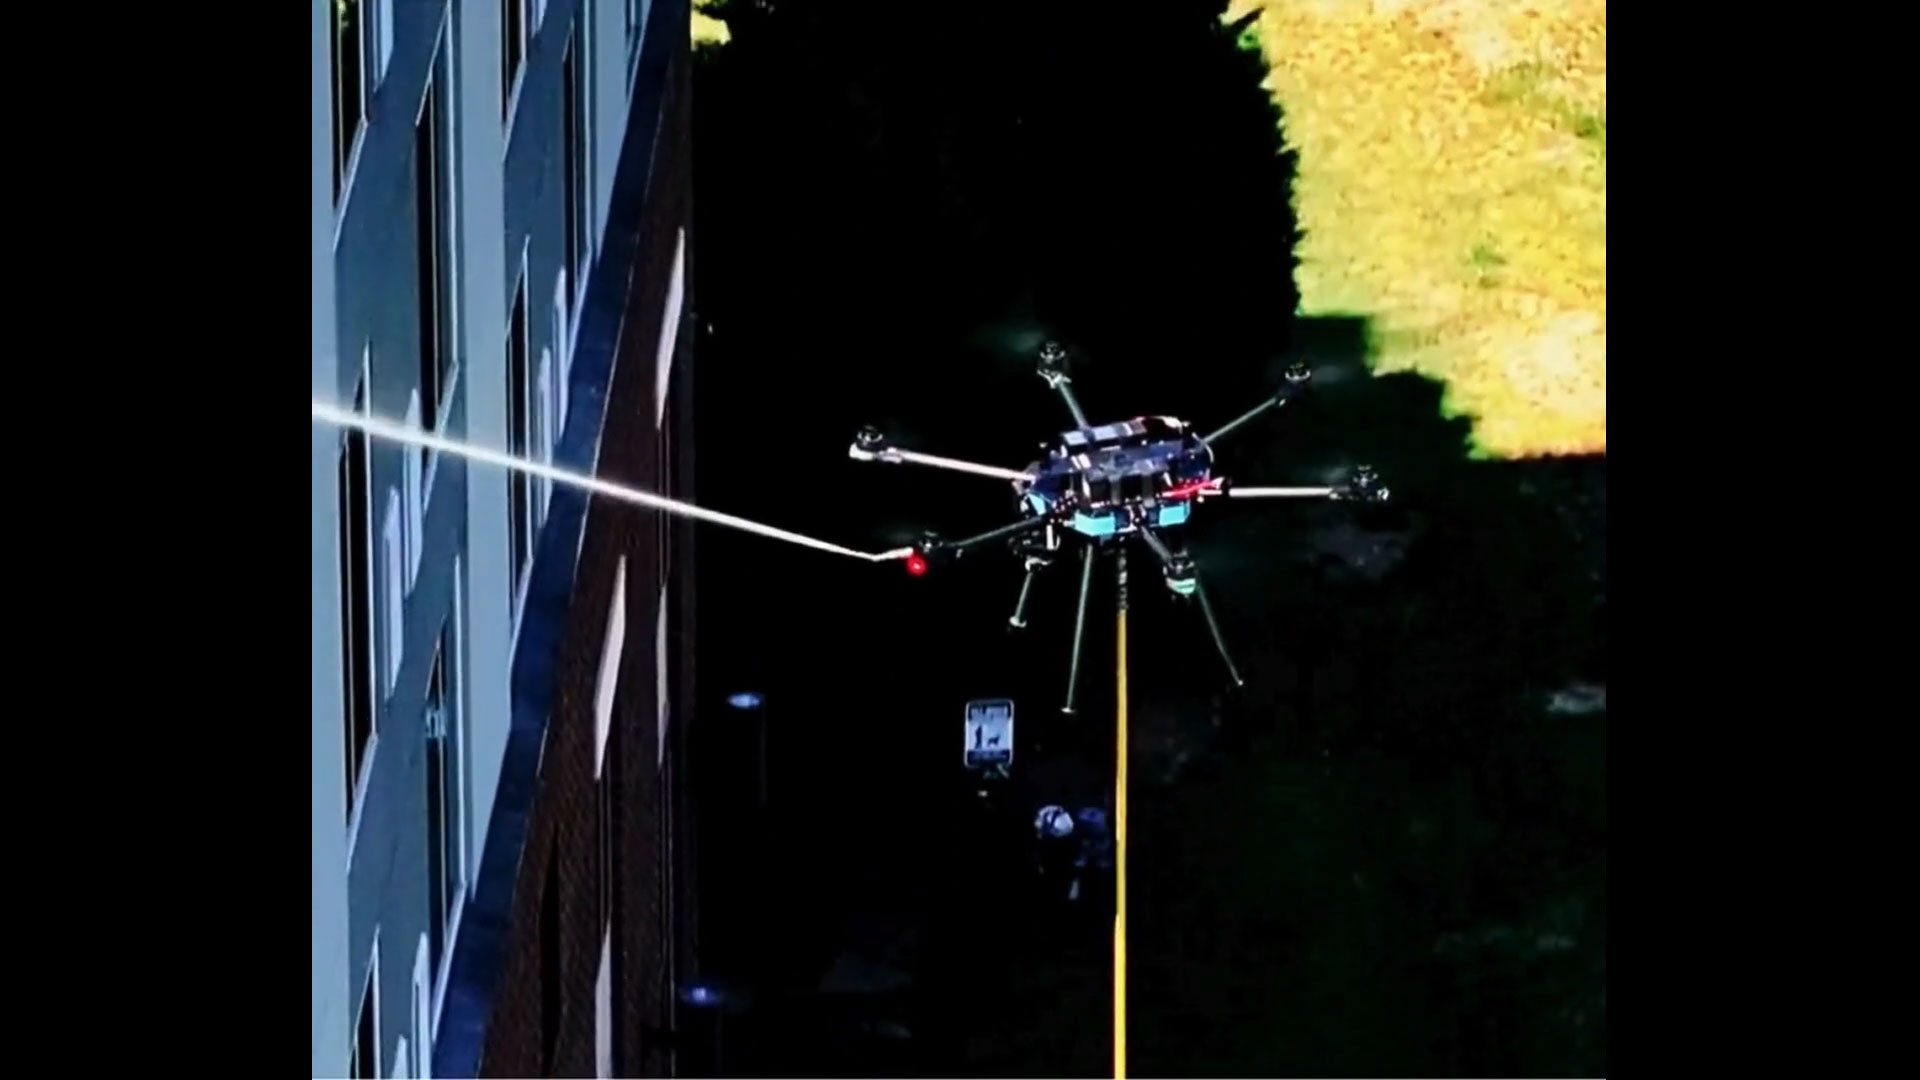 Remote controlled drone power washing a hotel.